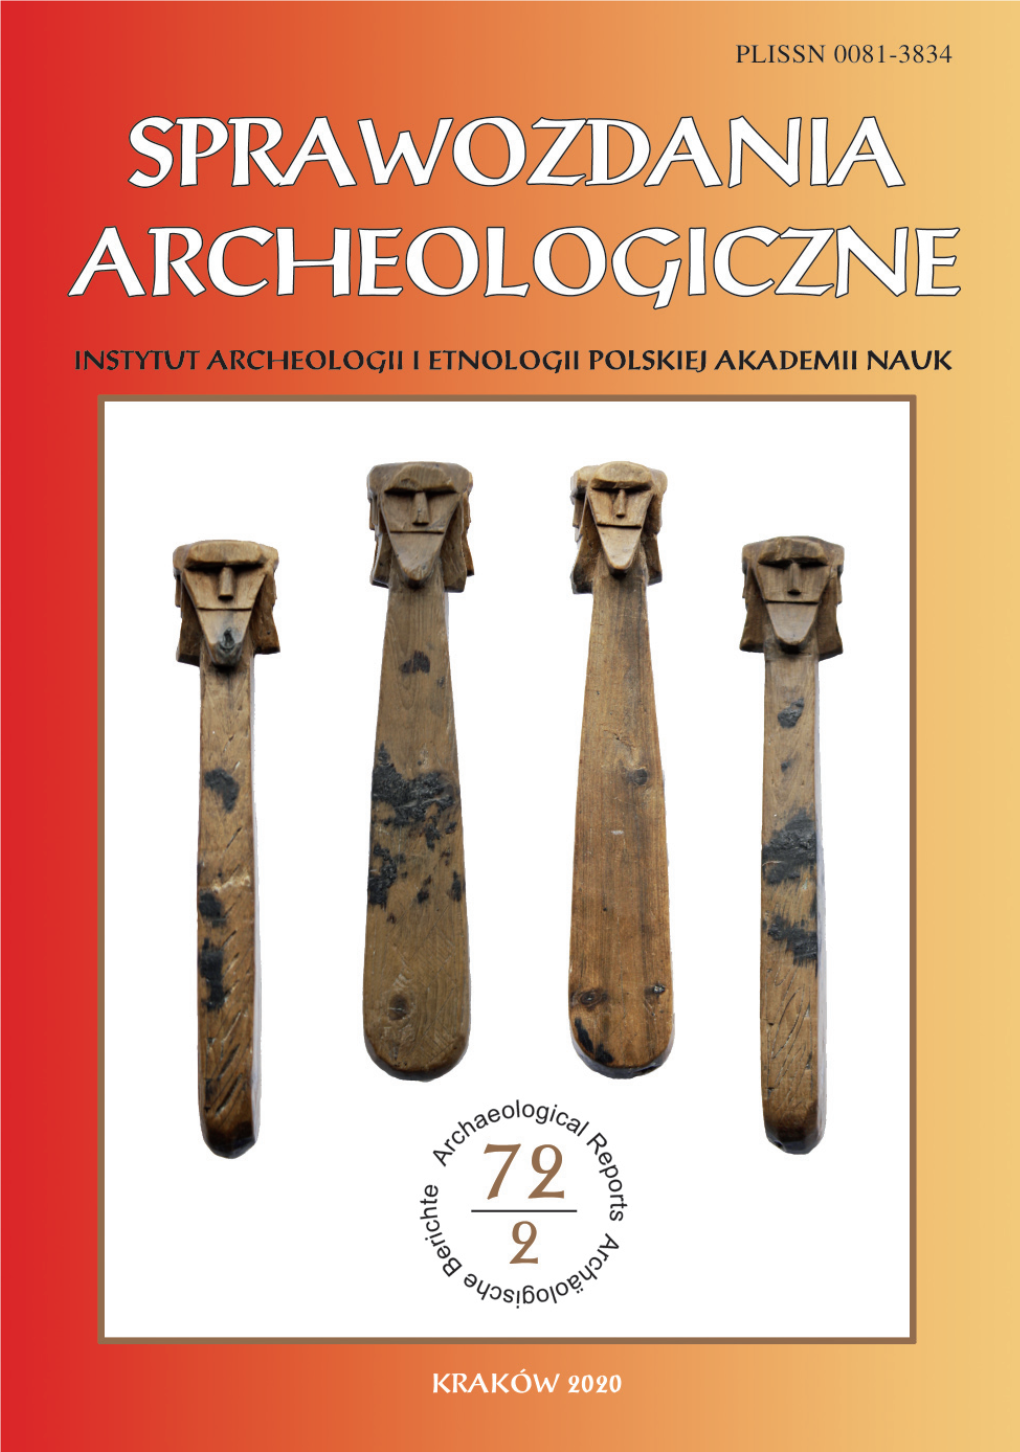 Comparative Analysis of Early Medieval Anthropomorphic Wooden Figurines from Poland. Representations of Gods, the Deceased Or Ritual Objects?